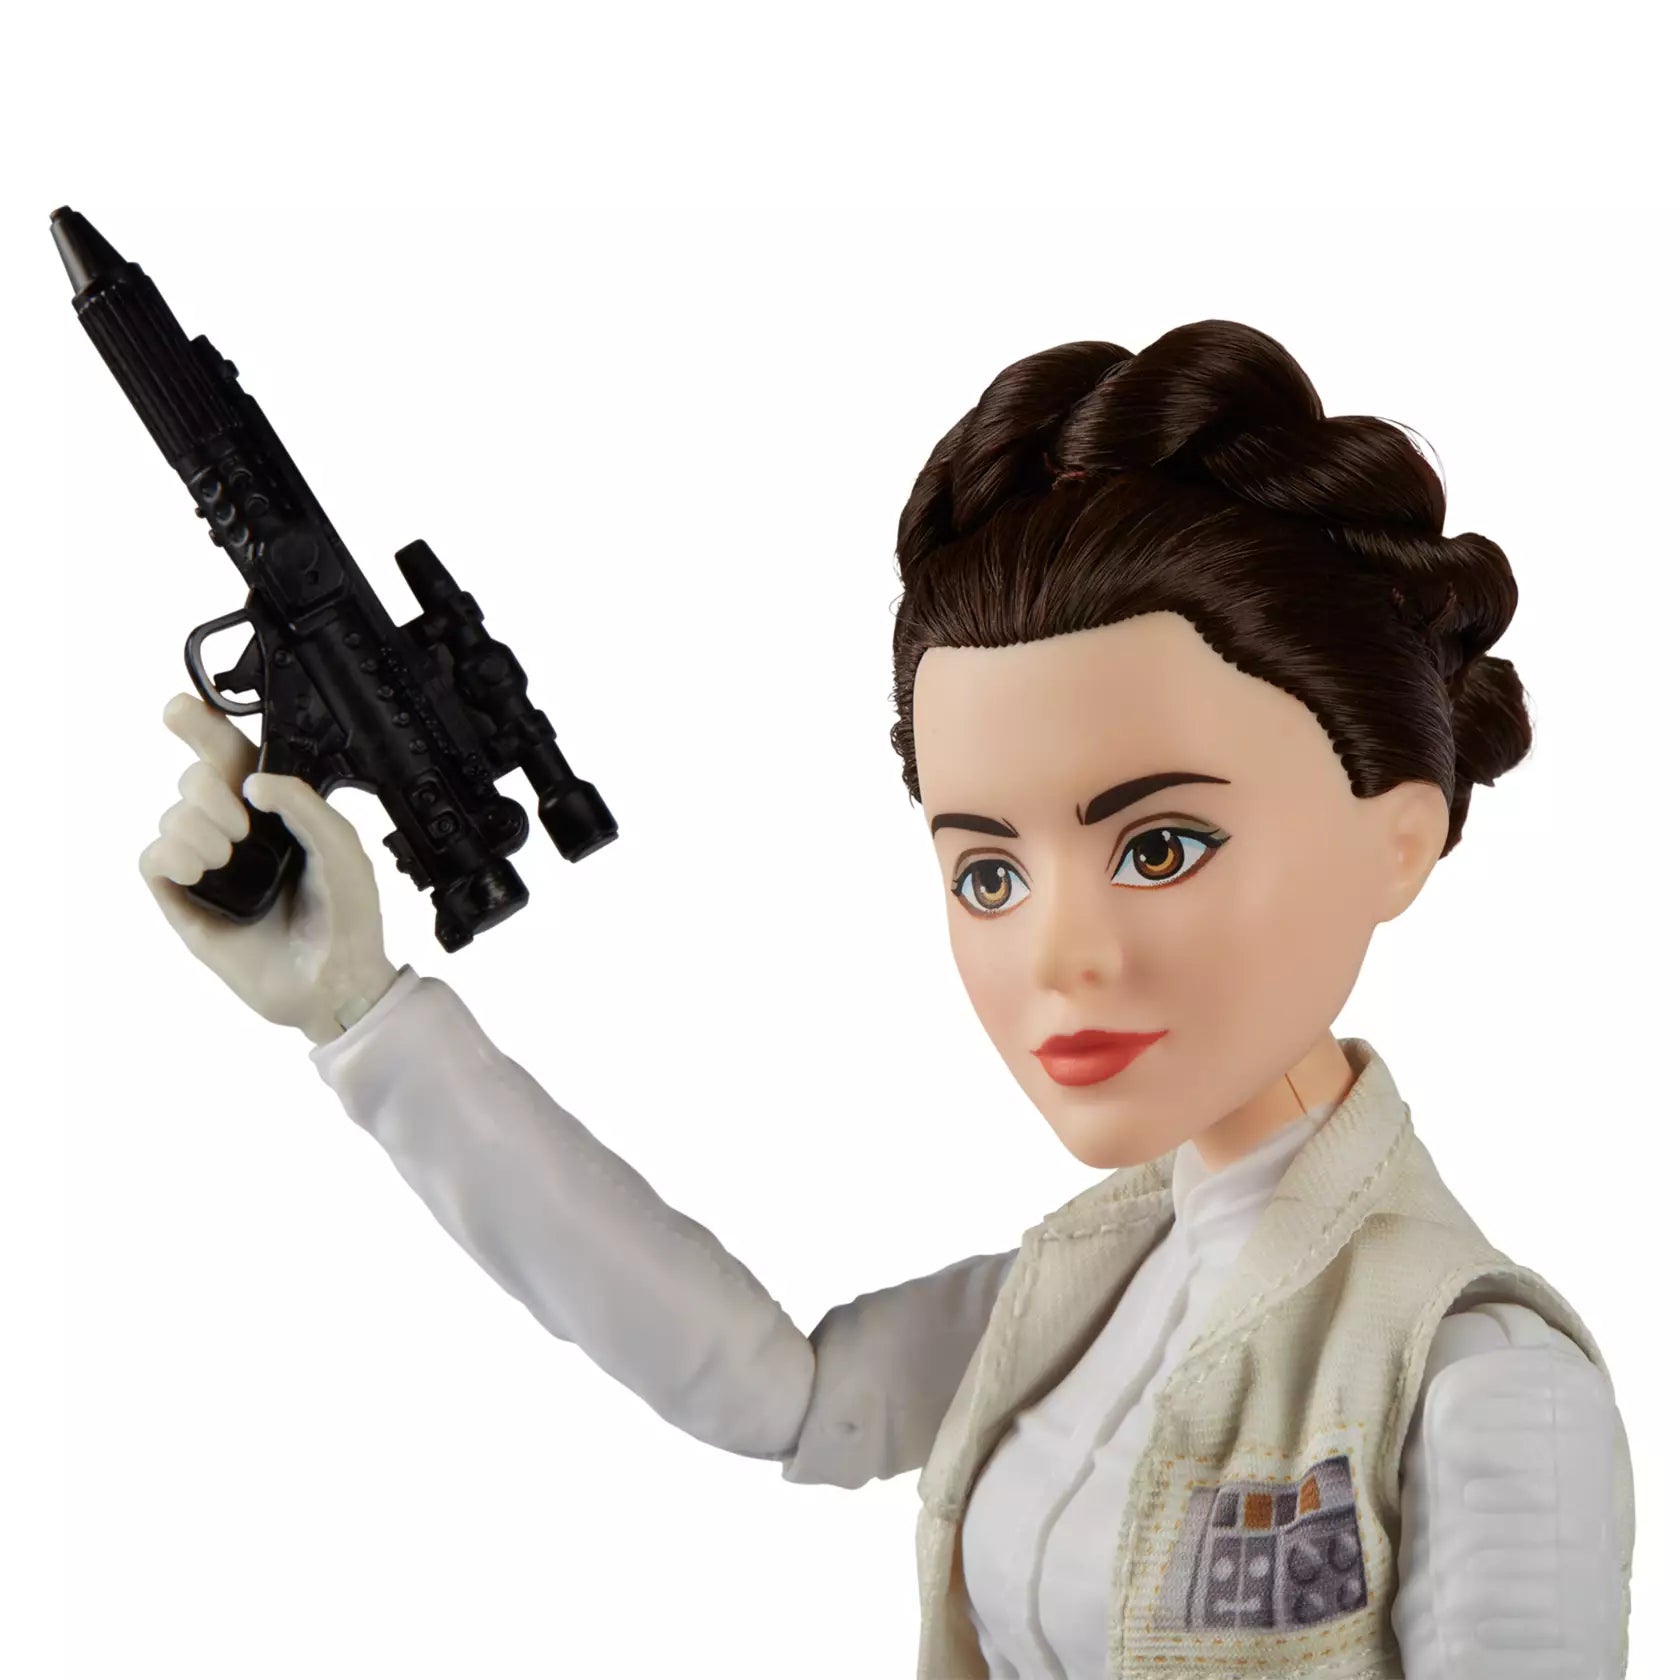 Star Wars: Forces of Destiny – Princess Leia Organa & R2-D2 Action Figure Set, Collectible Movie Characters